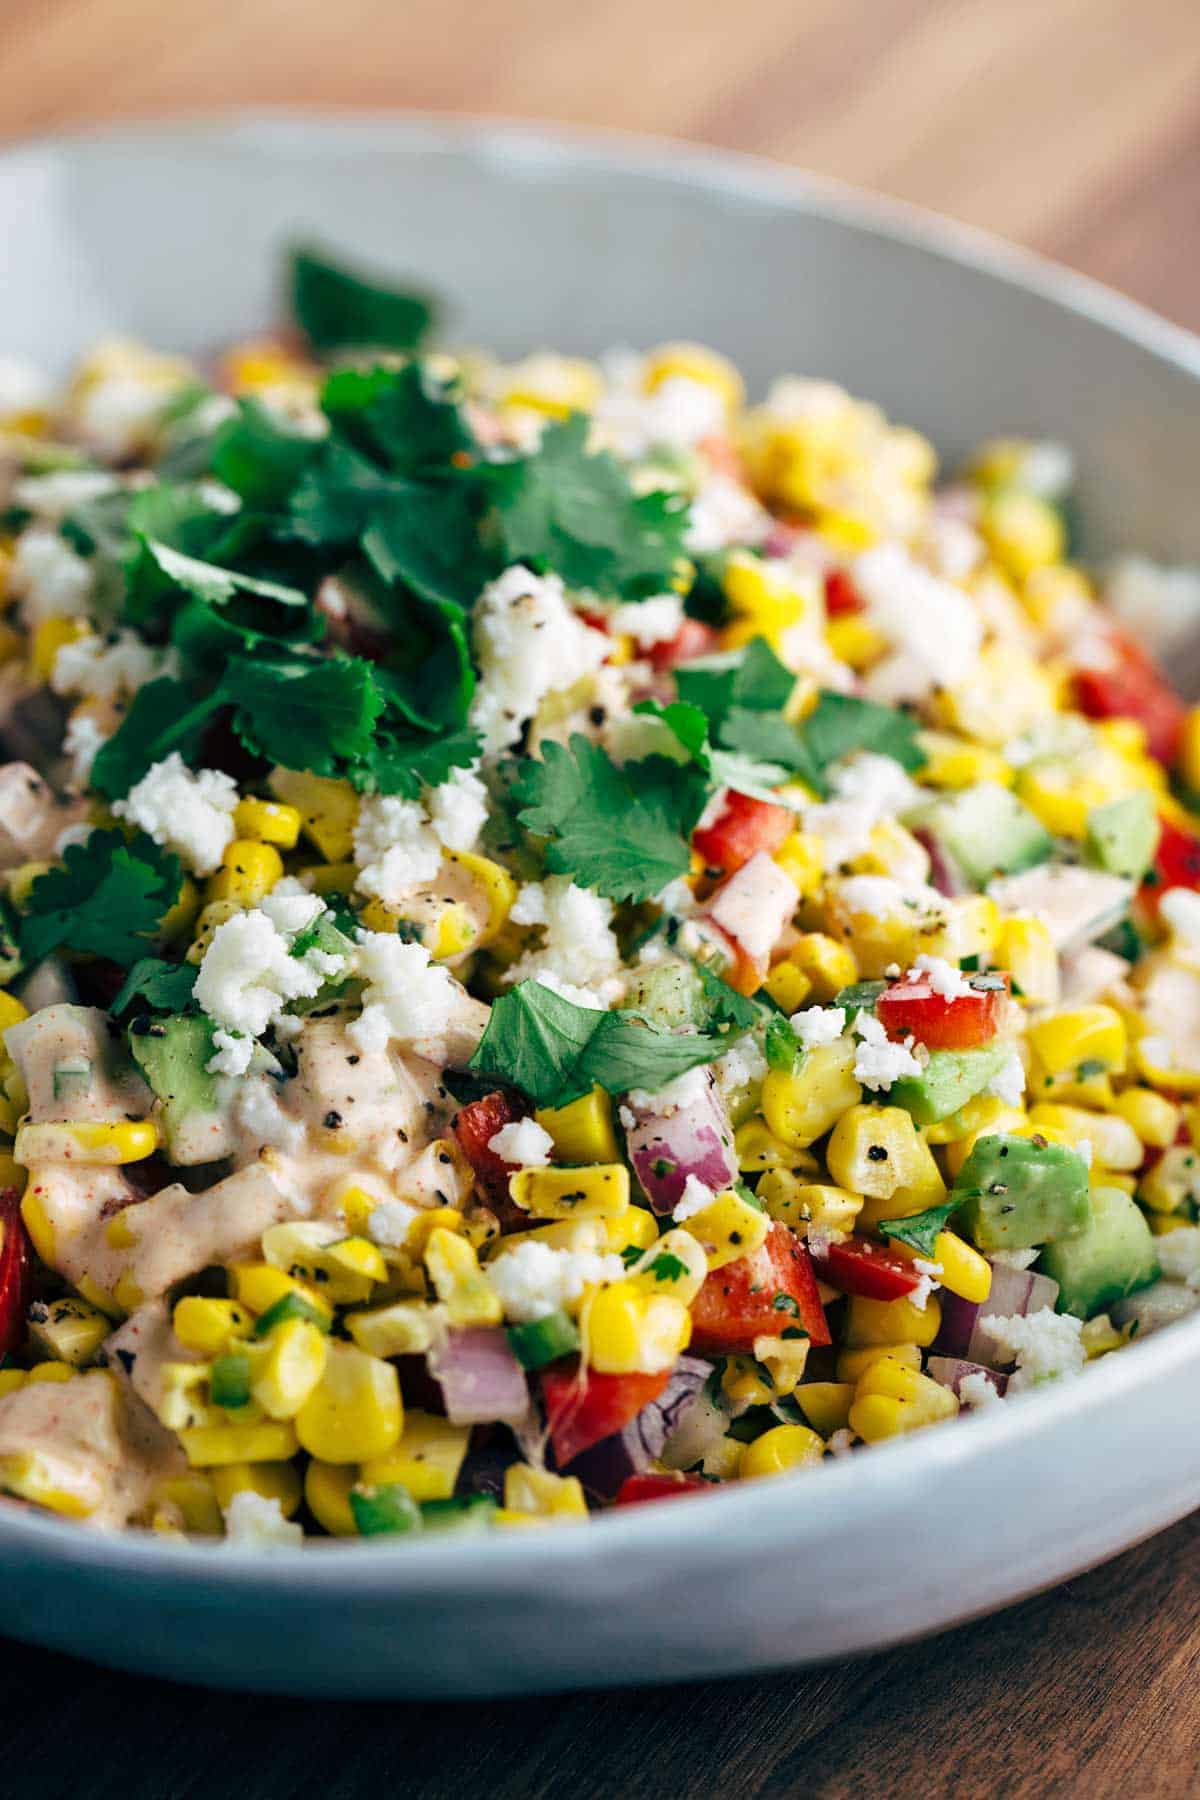 Mexican Street Corn Salad with Chipotle Dressing